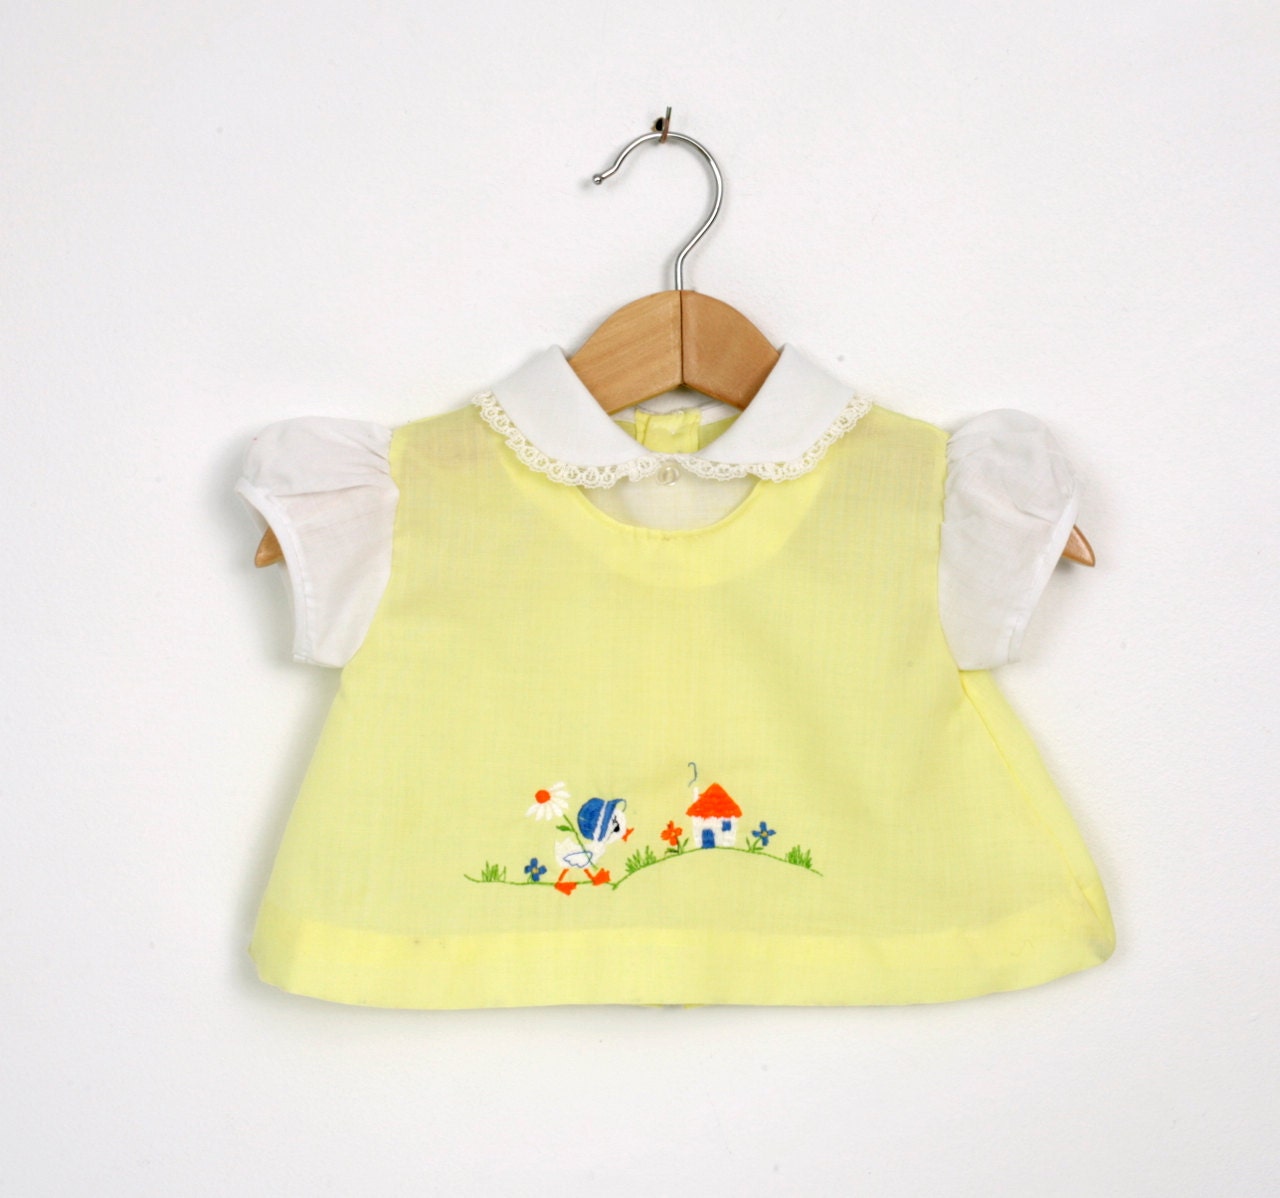 Vintage Baby Girl Shirt or Dress in Yellow and White 0 to 6 months - udaskids